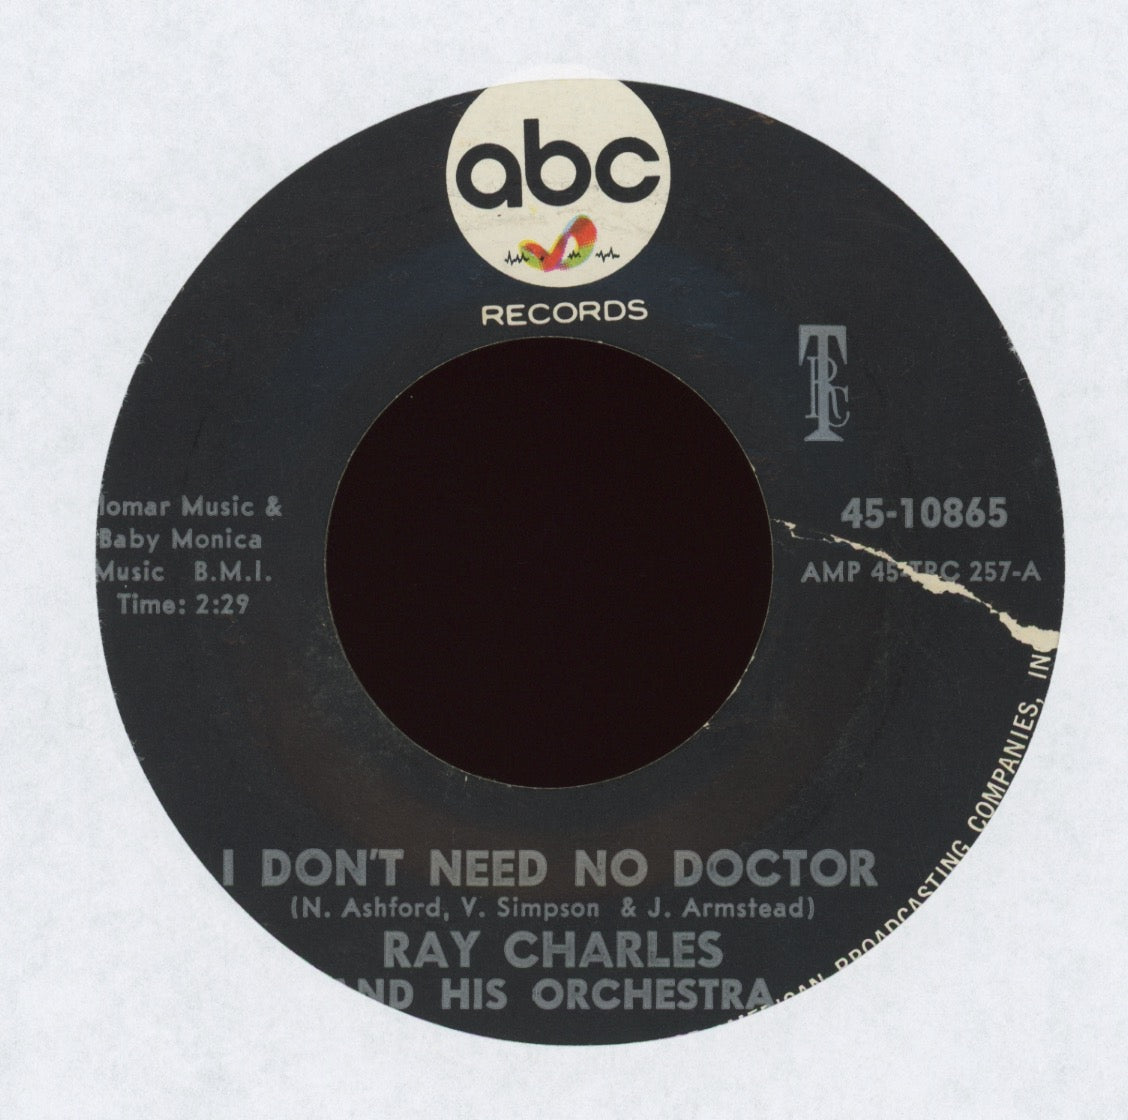 Ray Charles - I Don't Need No Doctor on ABC